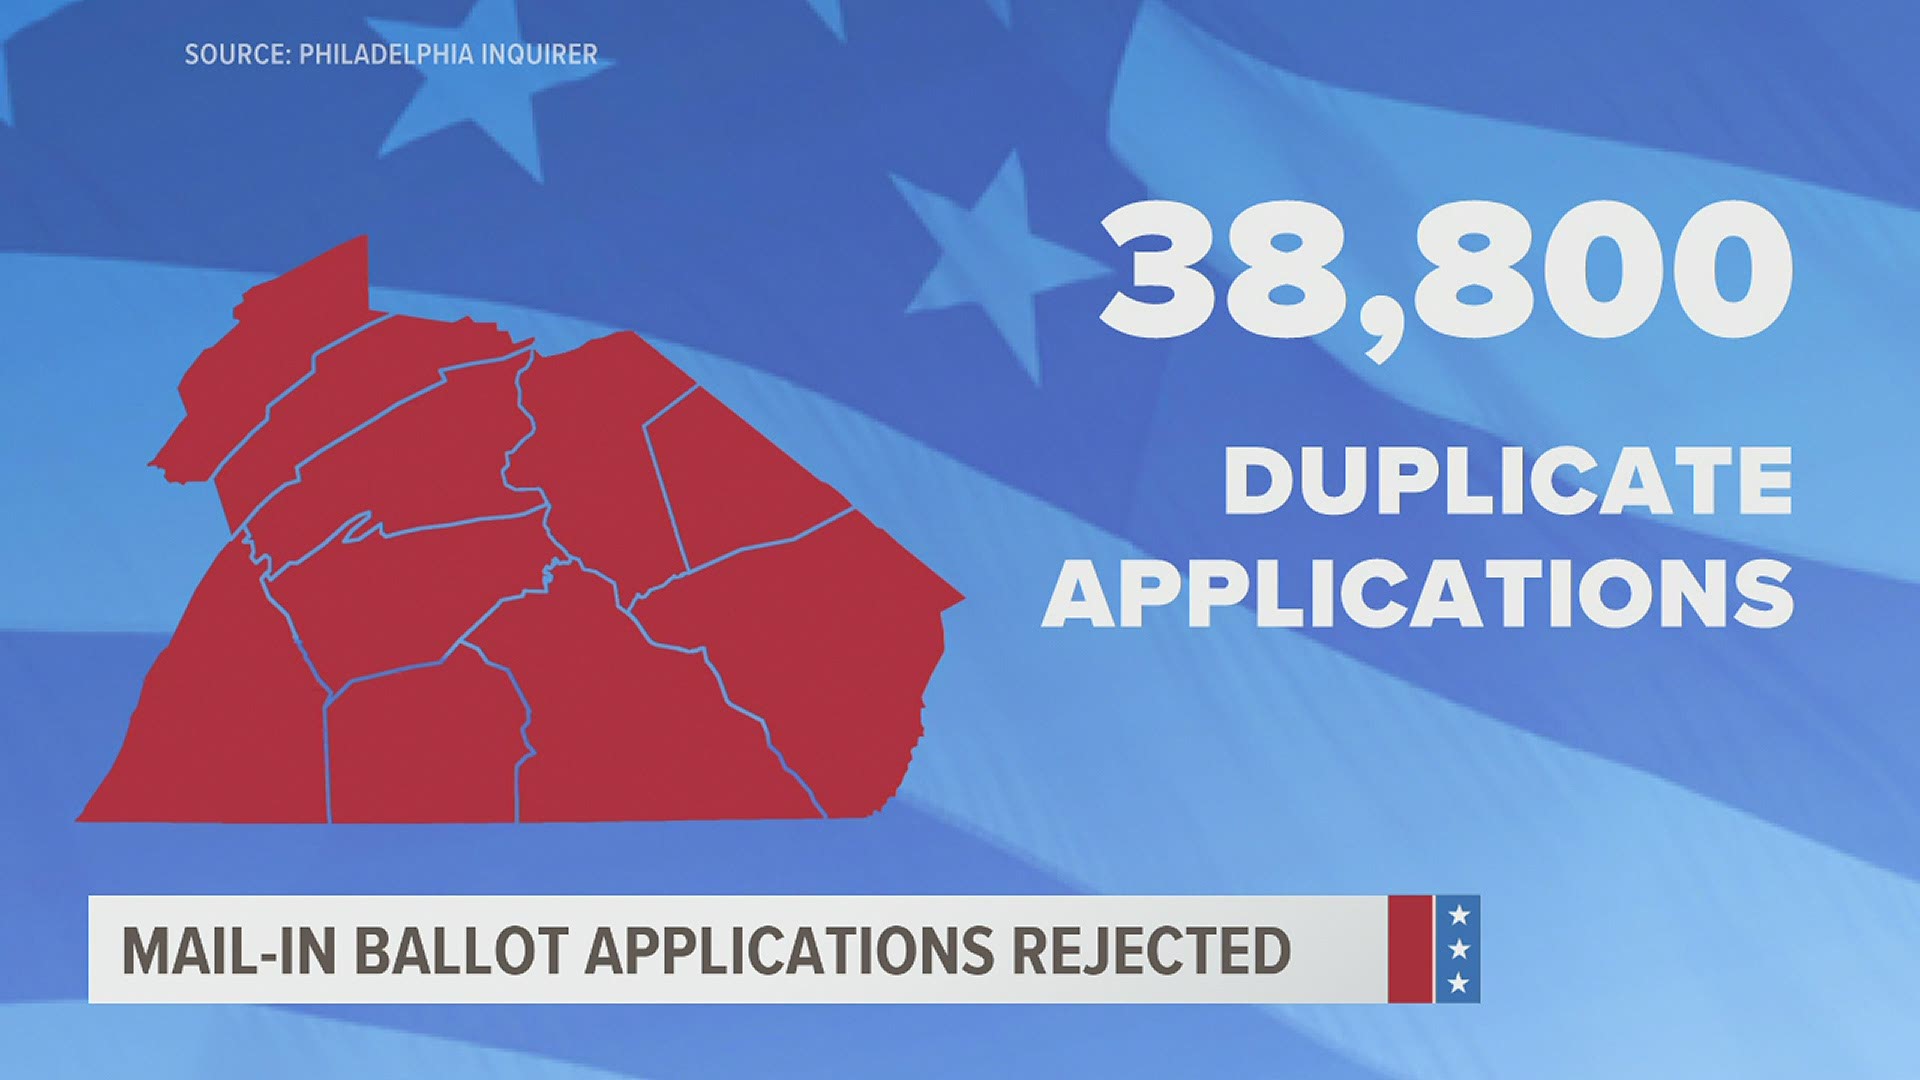 More than 370,000 mail-in ballot applications in Pennsylvania have been rejected; the majority of them have been duplicate applications